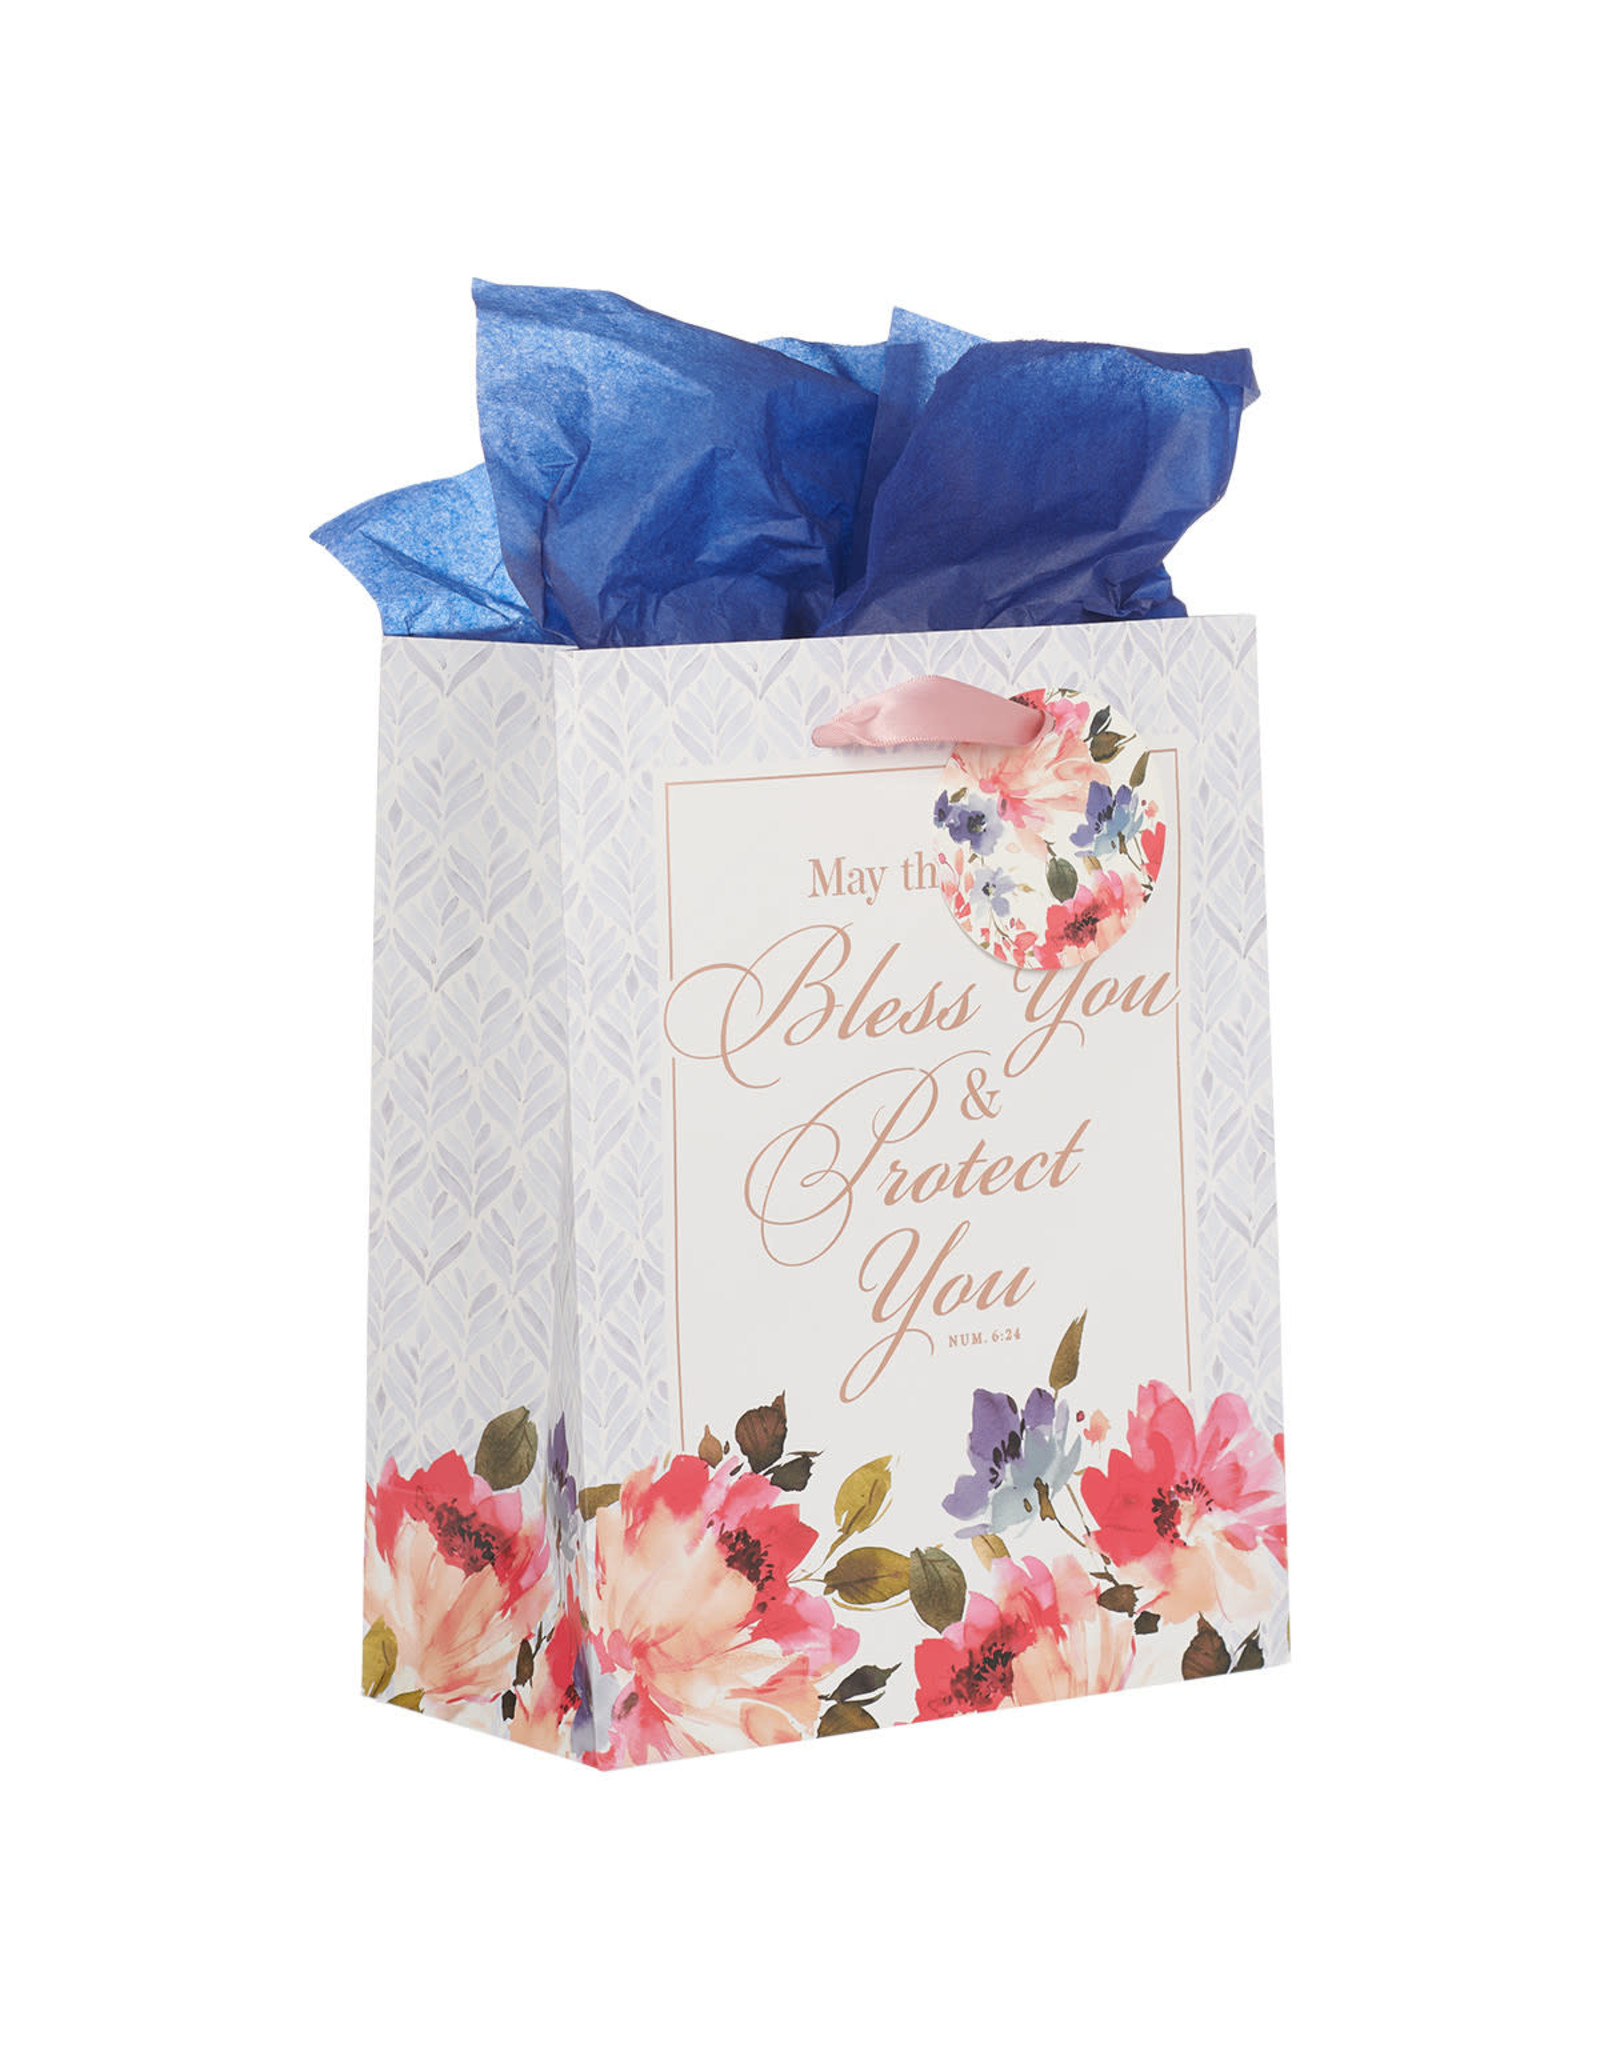 Medium Gift Bag - May the Lord Bless You (Numbers 6:24)